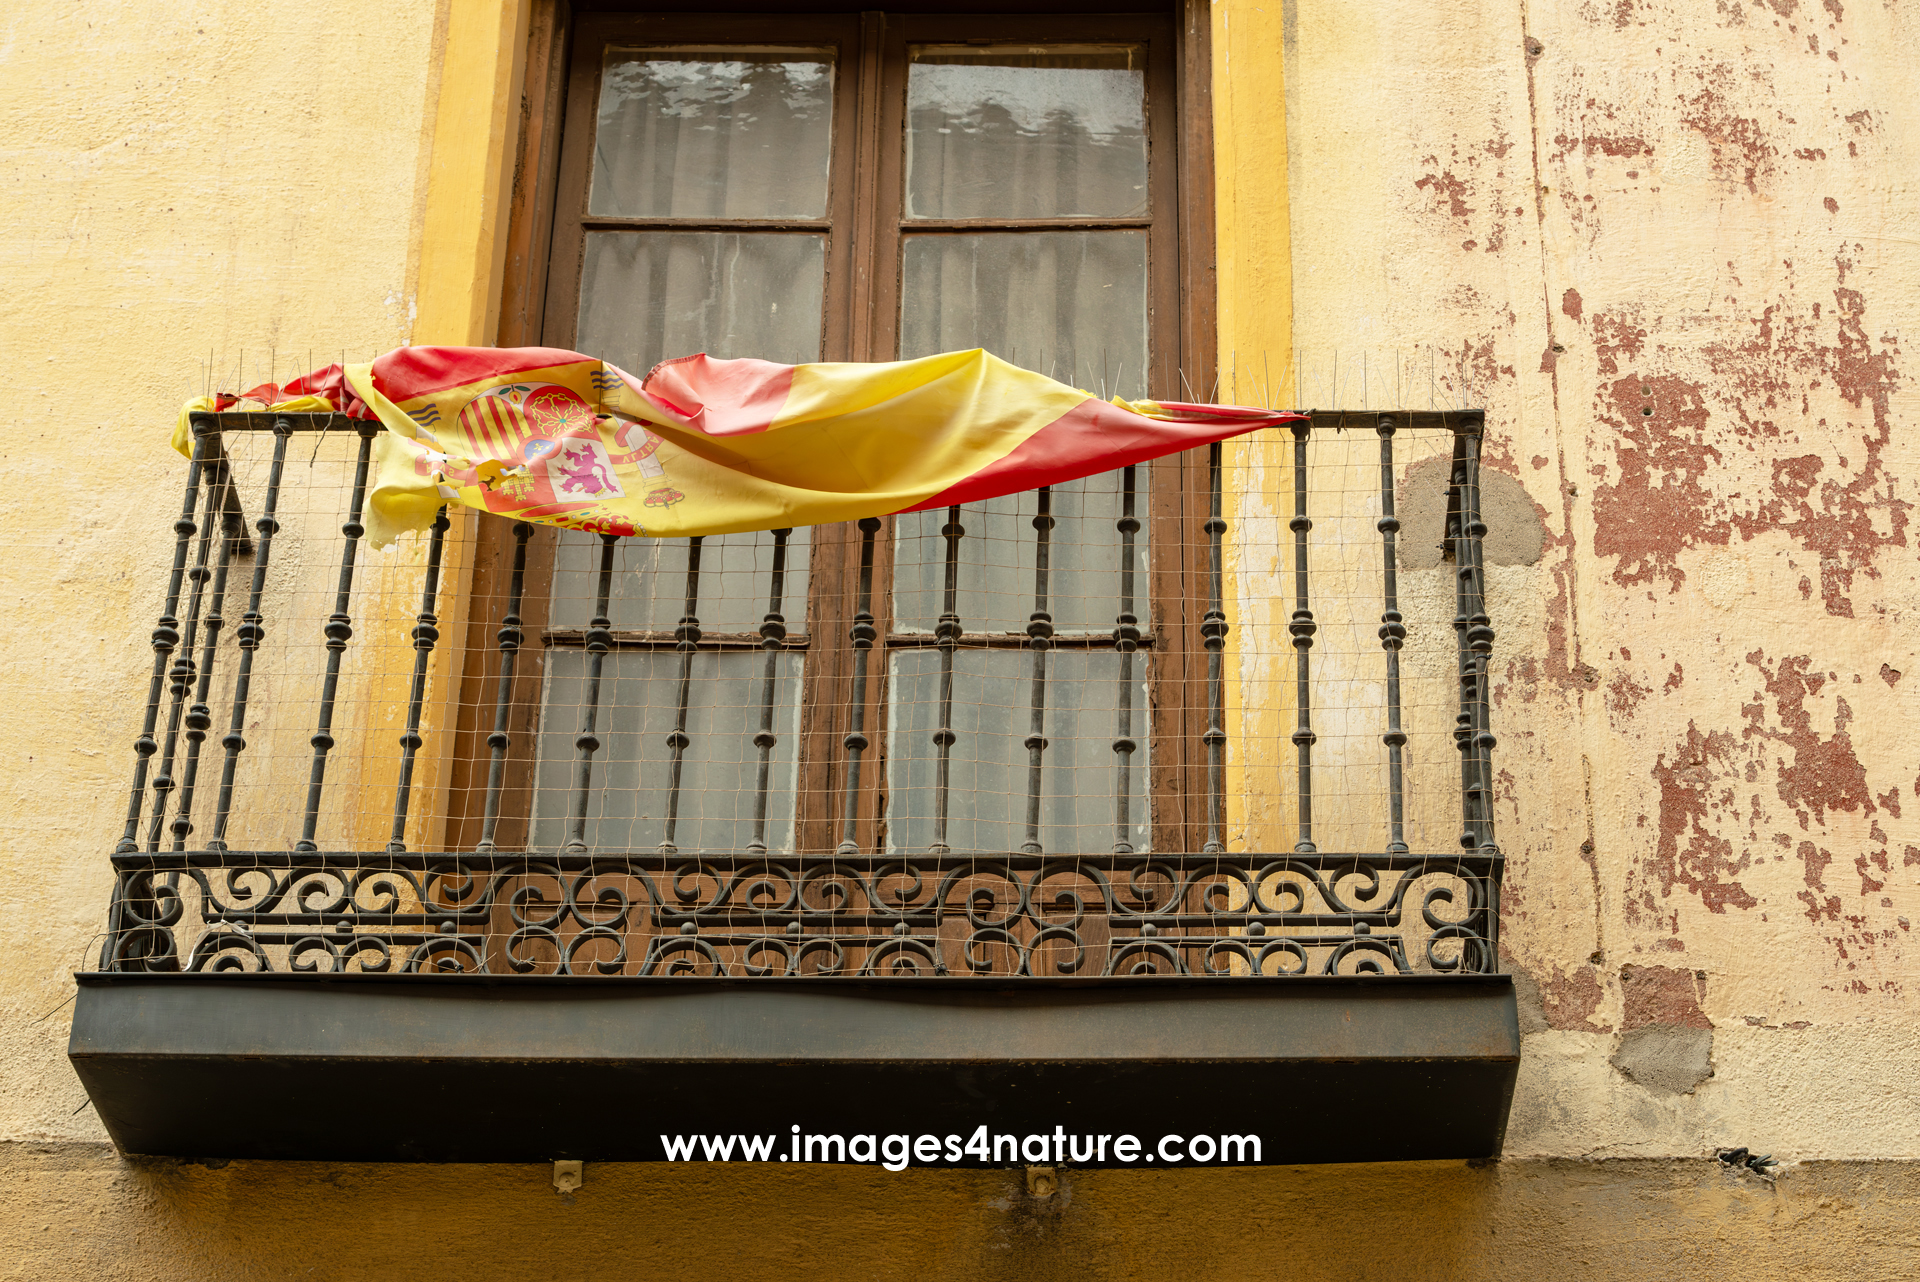 A balcony with a Spanish flag folded on top of the metal railing